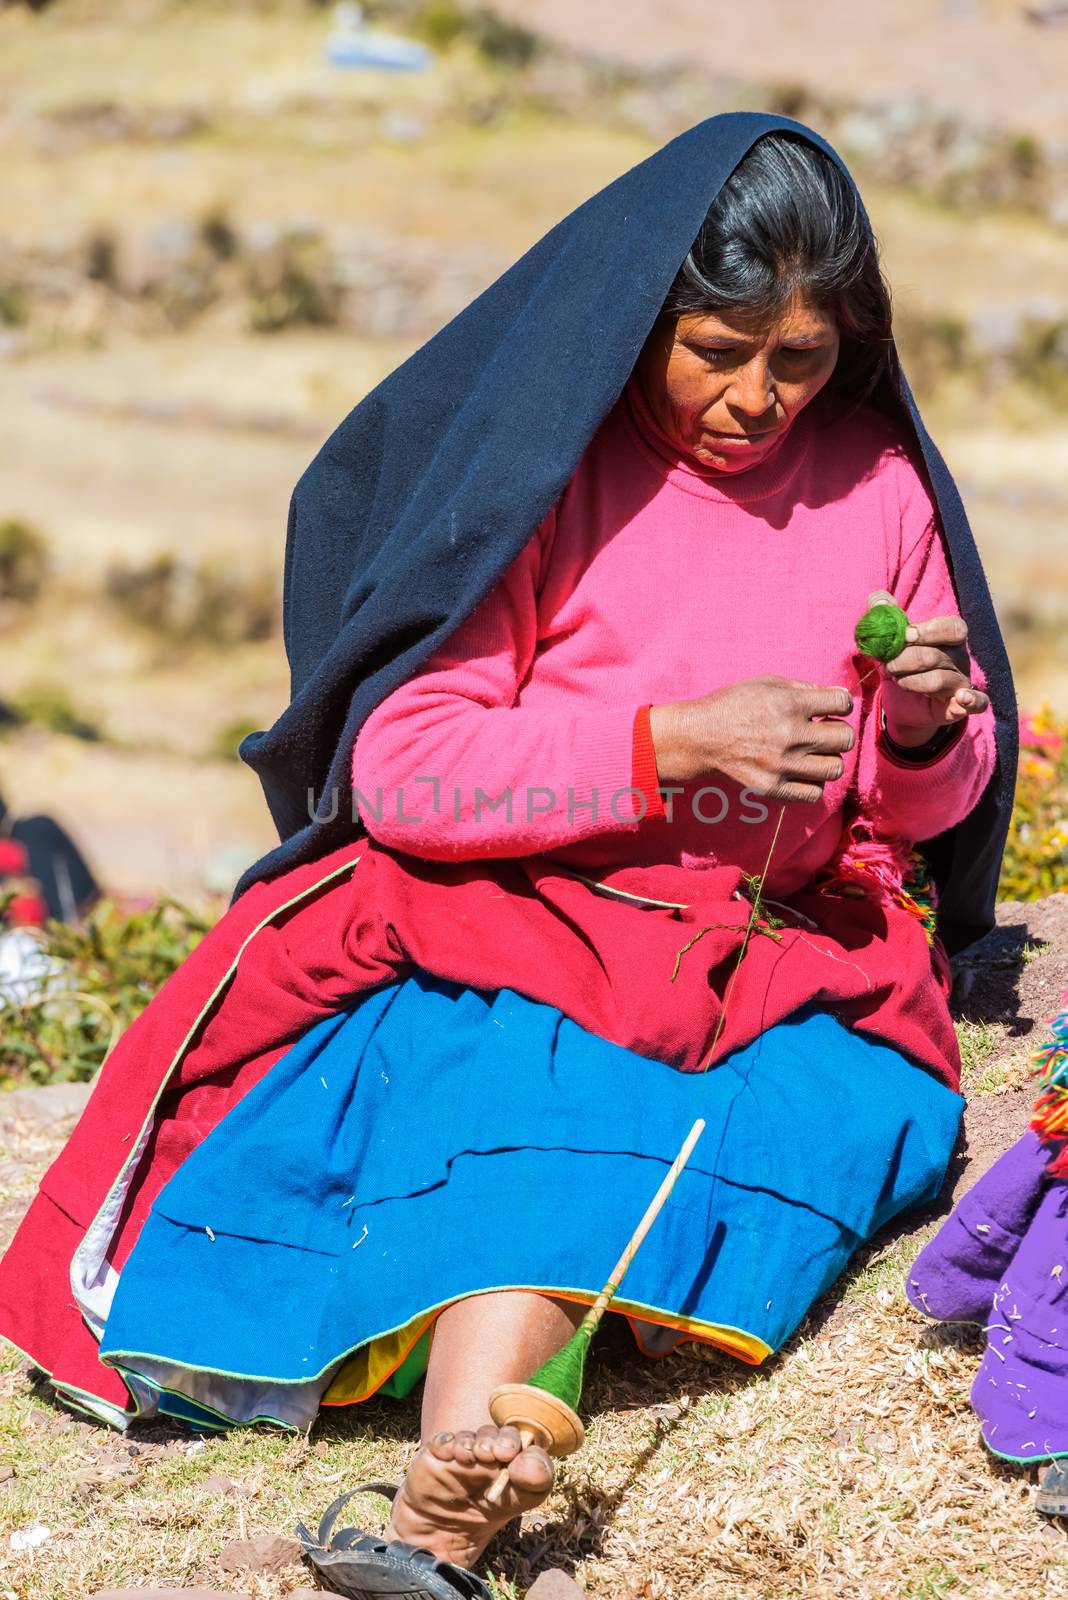 Puno, Peru - July 25, 2013: woman weaving in the peruvian Andes at Taquile Island on Puno Peru at july 25th, 2013.